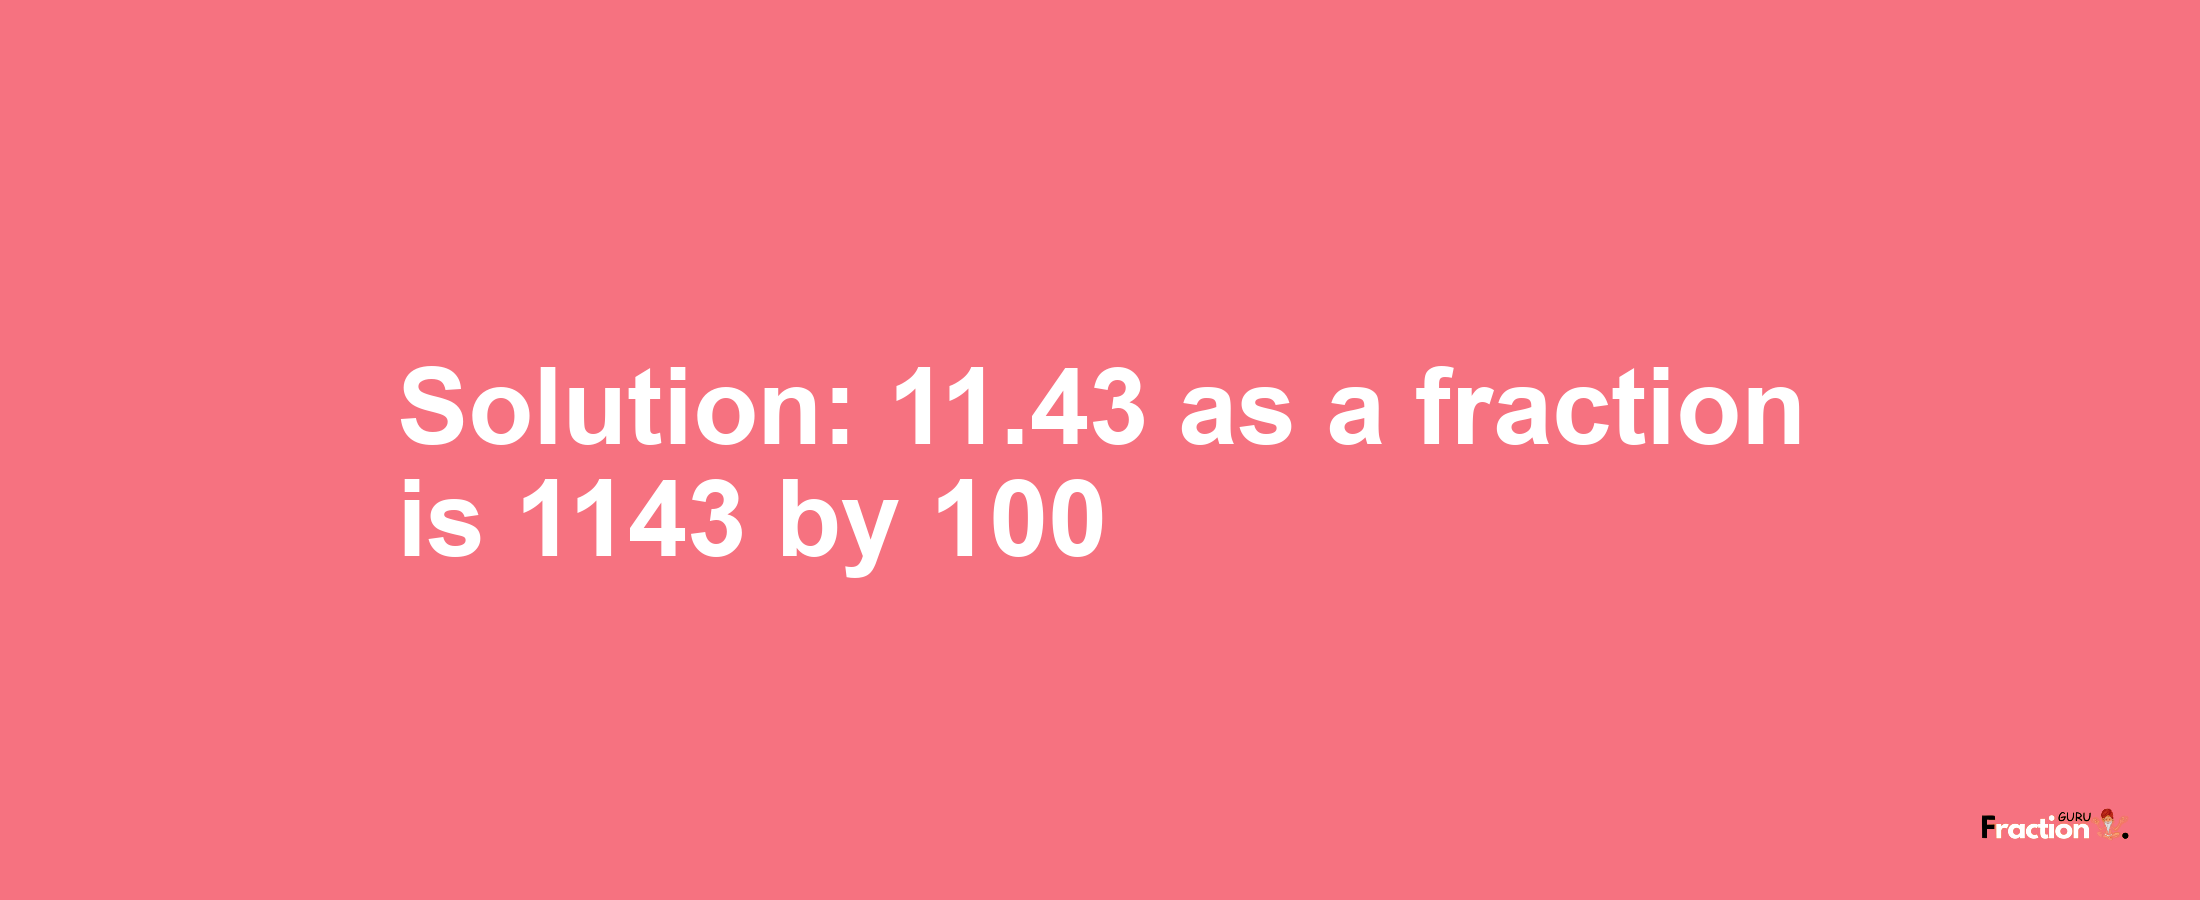 Solution:11.43 as a fraction is 1143/100